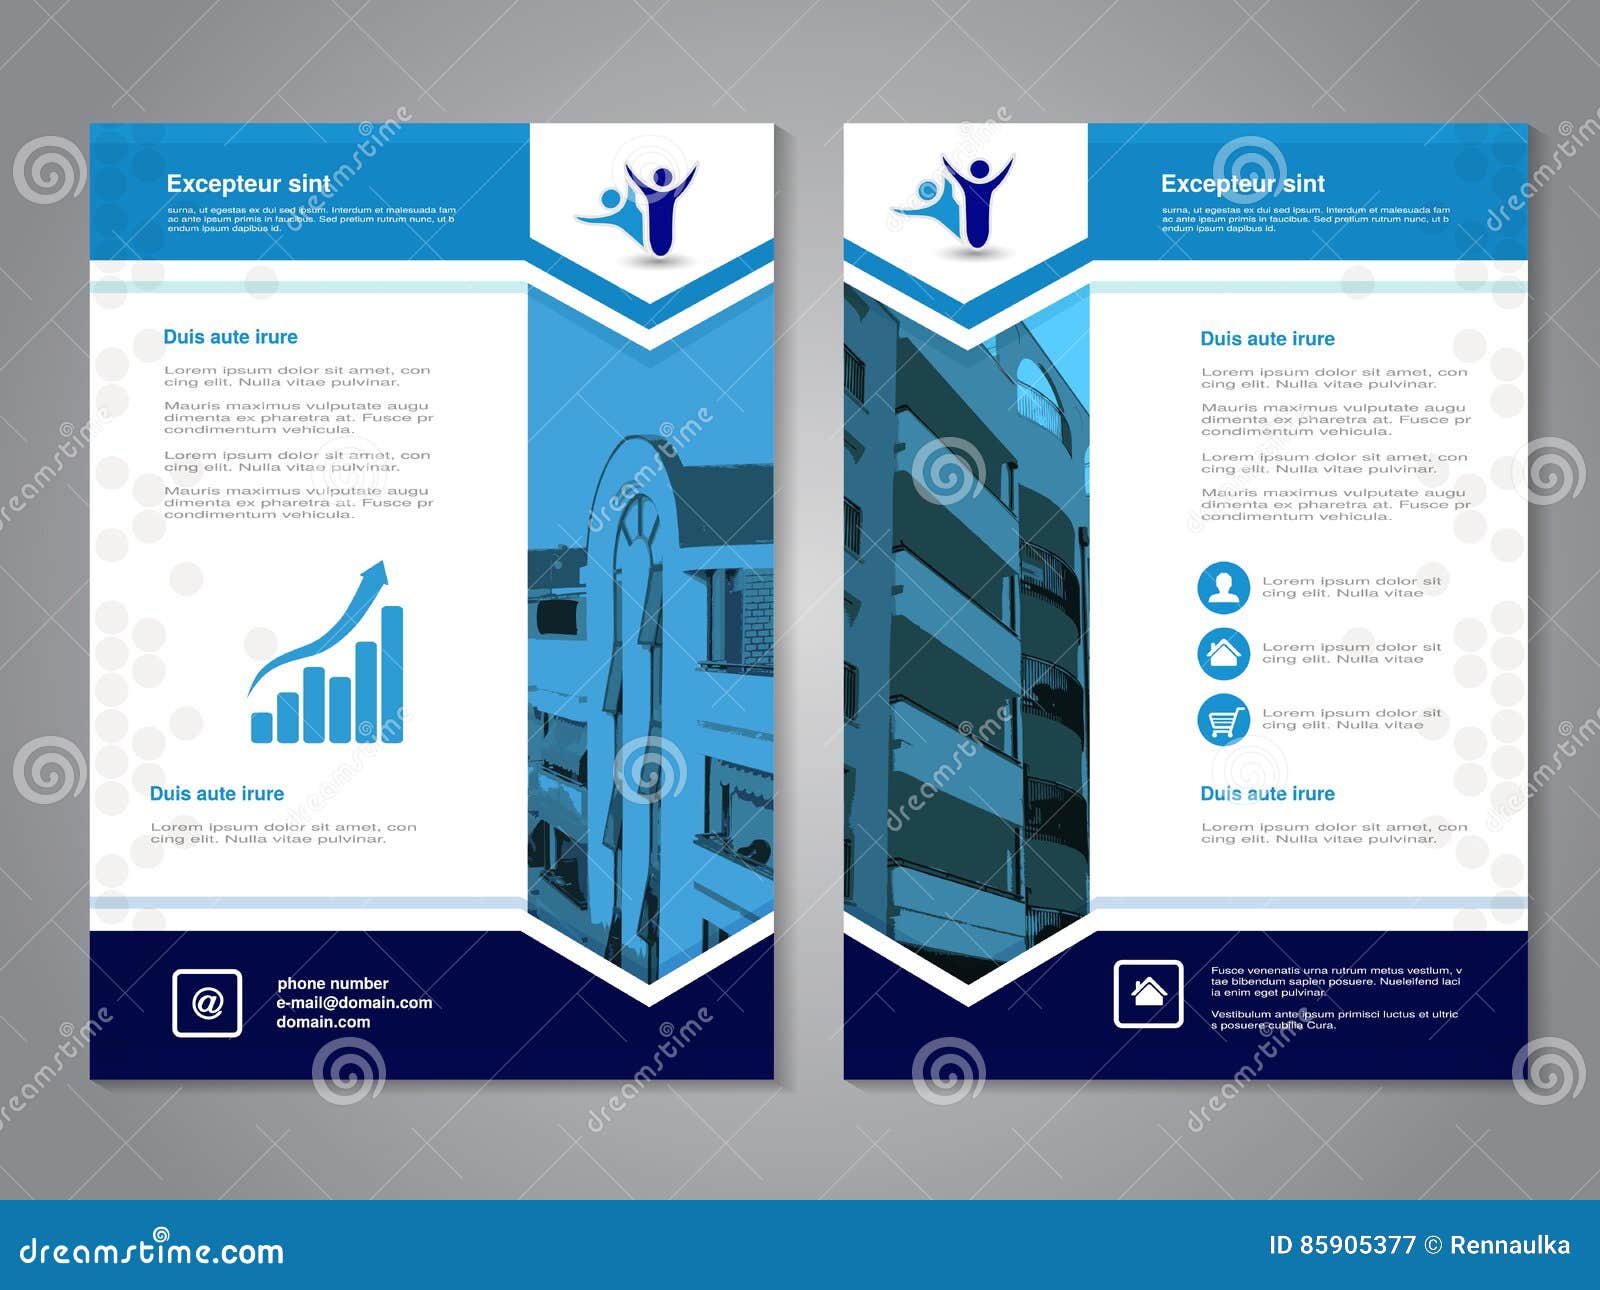 Modern Brochure Abstract Flyer With Background Of Buildings Layout Template Aspect Ratio For Size Poster Of Blue Dark Blue Stock Vector Illustration Of Geometric Advert